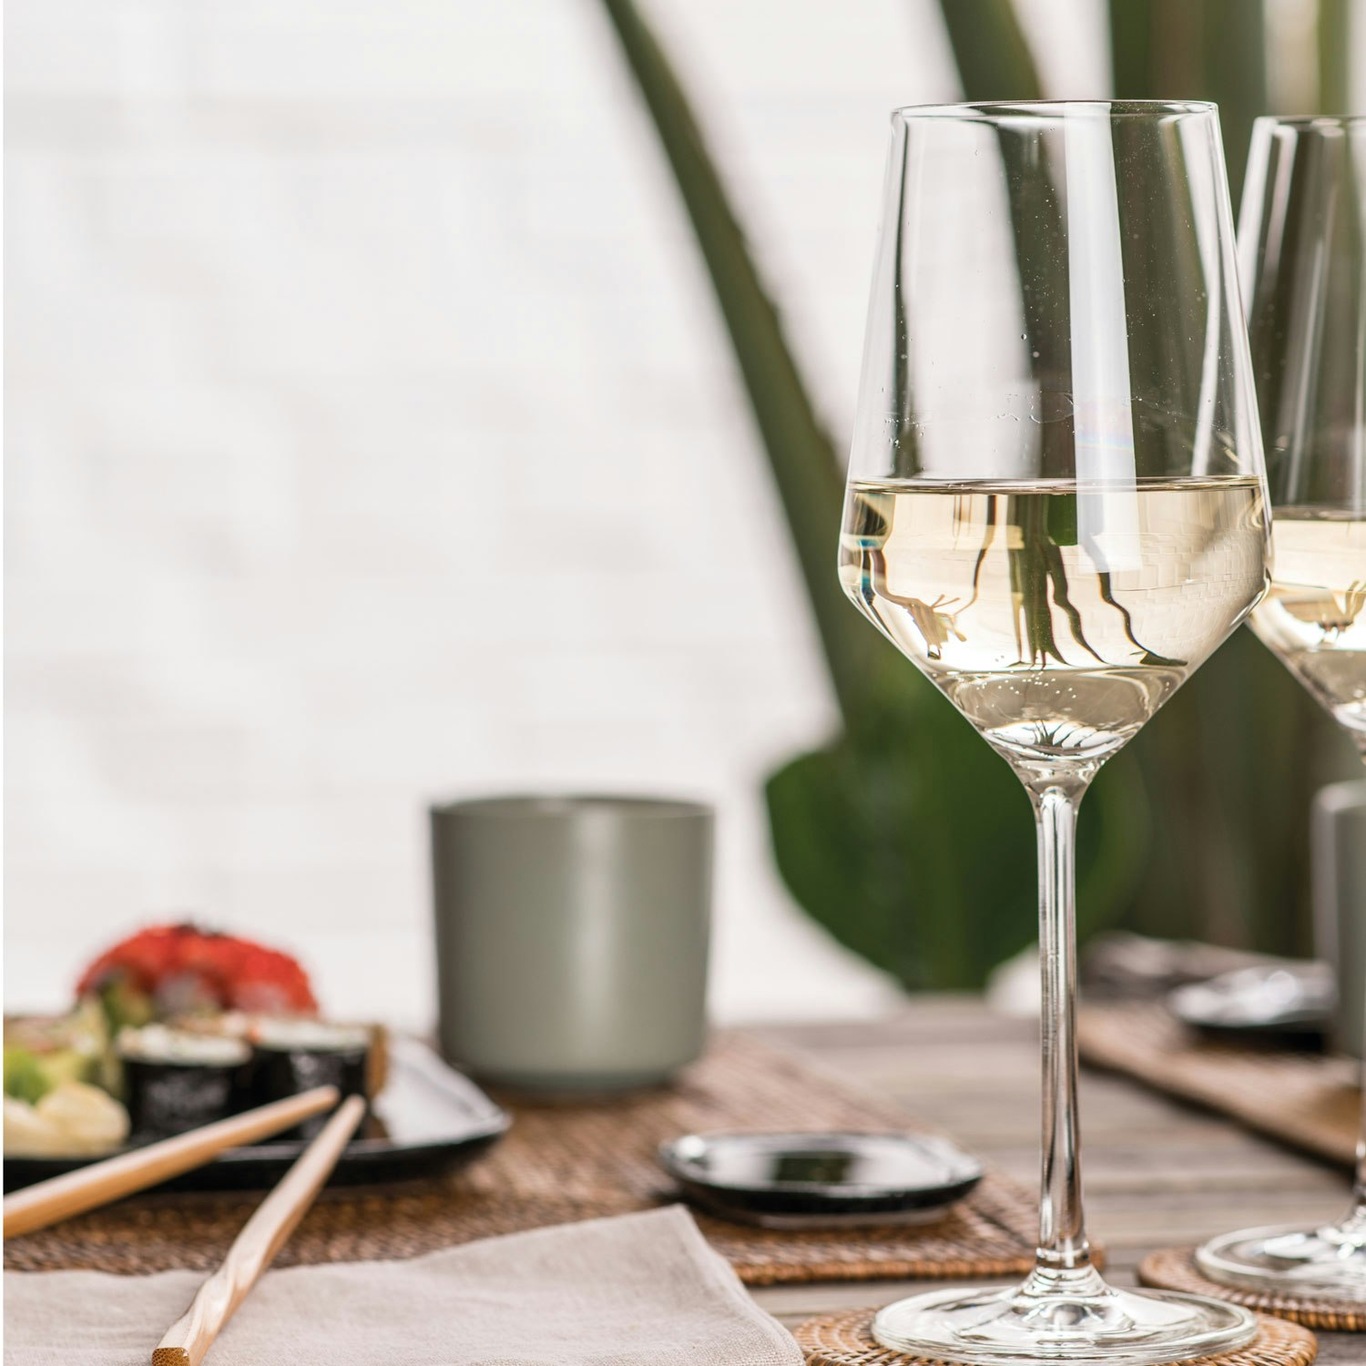 https://royaldesign.com/image/2/zwiesel-pure-riesling-white-wine-glass-30-cl-2-pack-6?w=800&quality=80